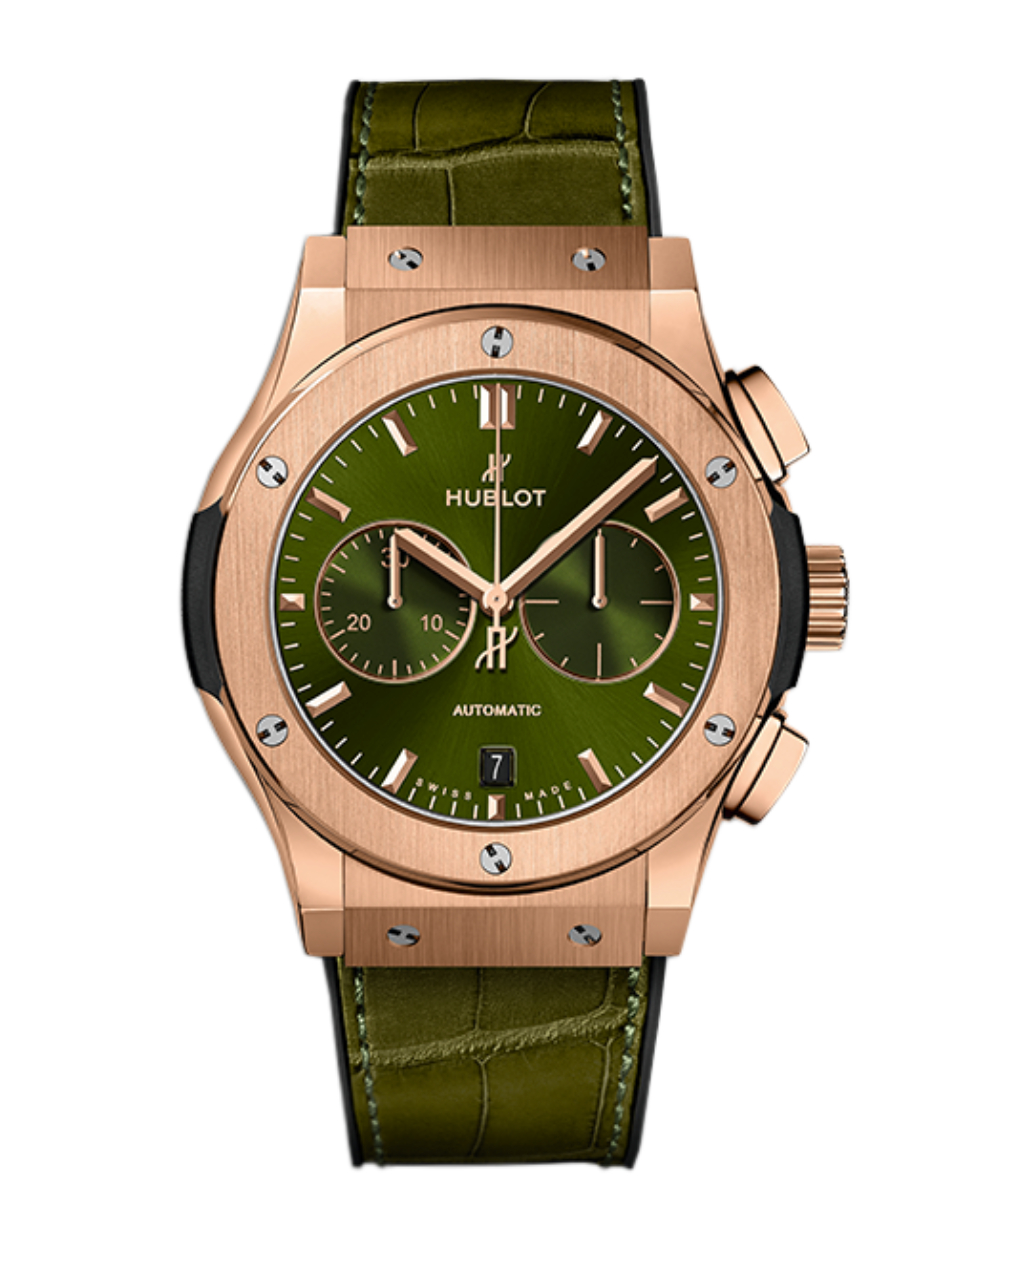 Classic Fusion Chronograph King Gold Green 42mm 541.OX.8980.LR